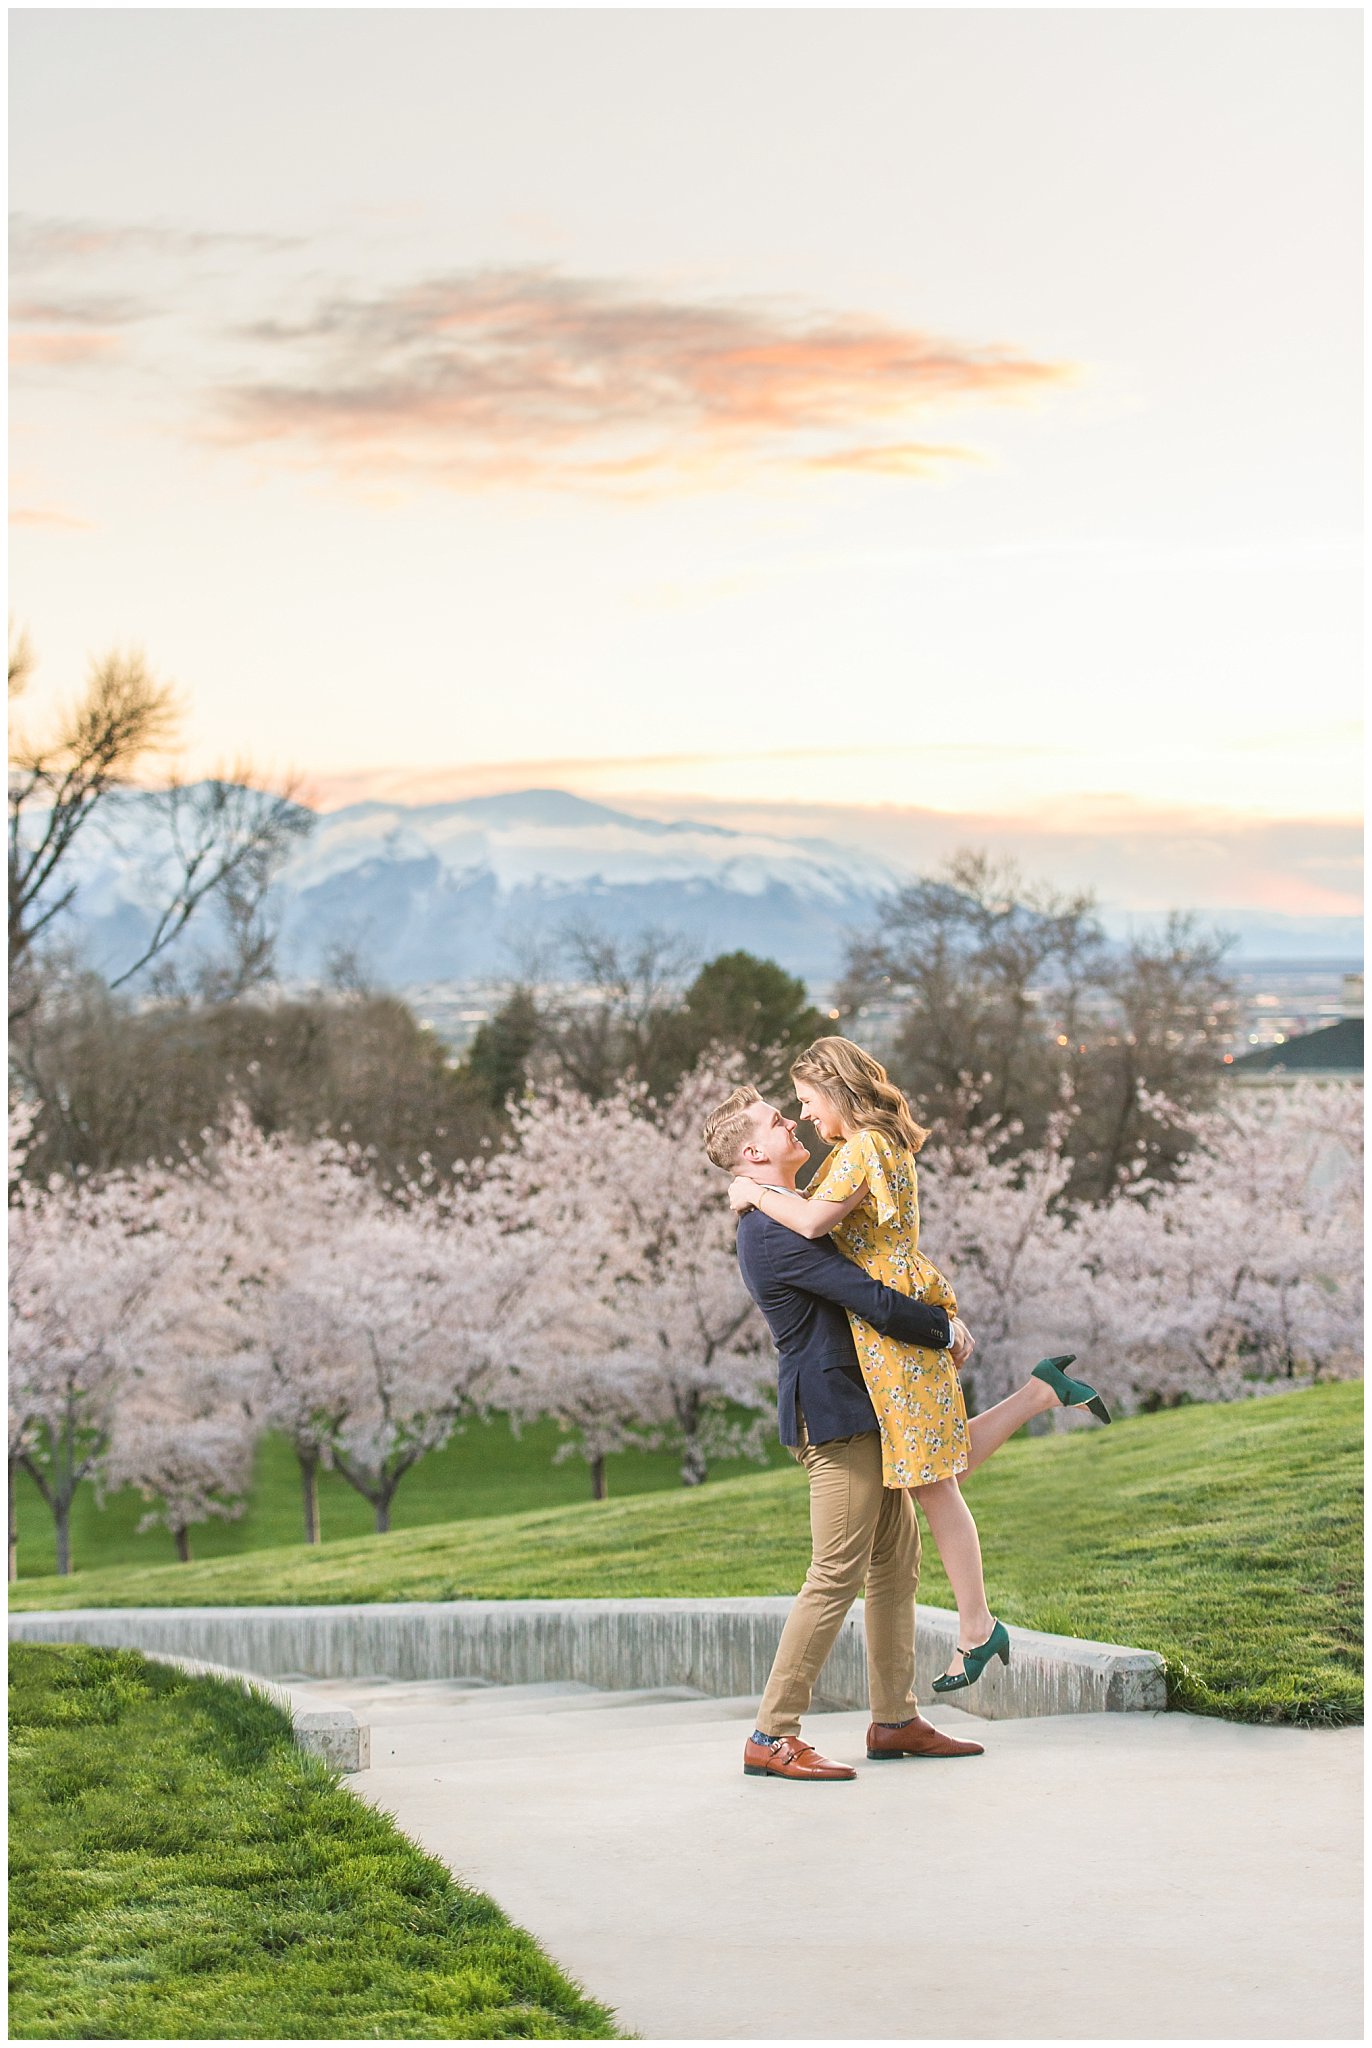 Couple does romantic lift at sunset in front of cherry blossoms at the Utah State Capitol building | Top Utah Wedding and Couples Photos 2019 | Jessie and Dallin Photography